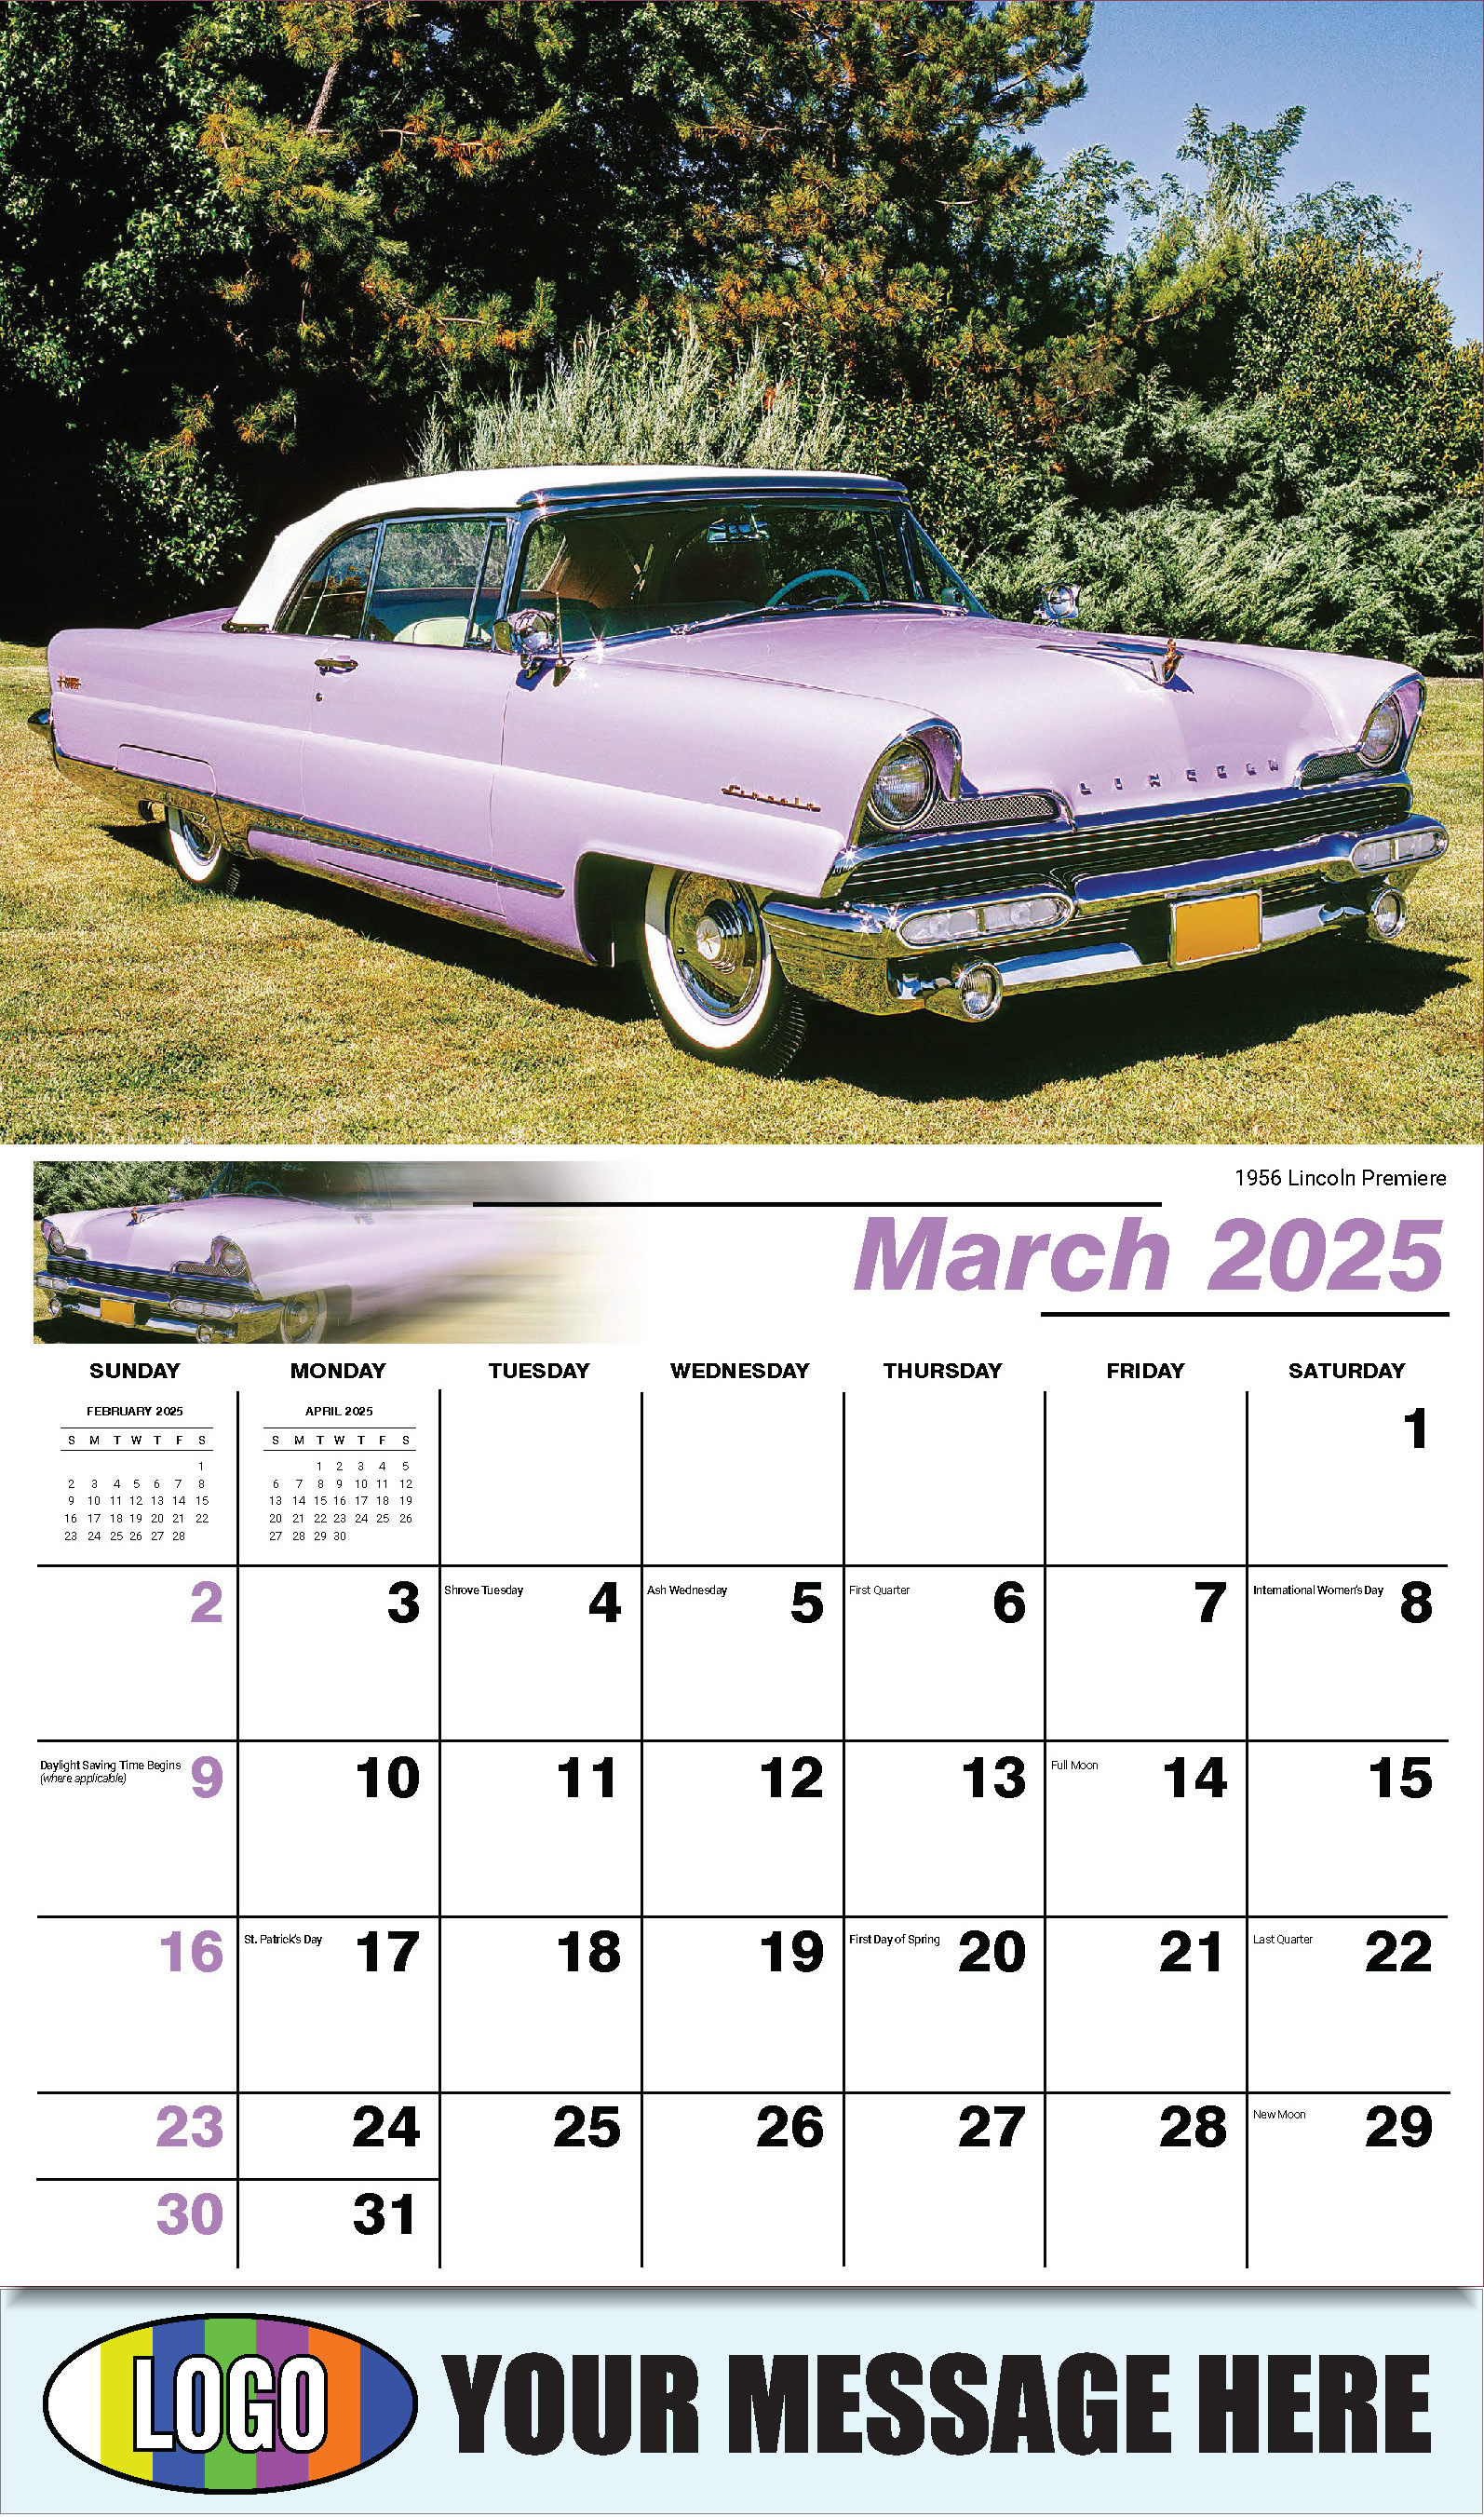 Henry's Heritage FORD Cars 2025 Automotive Business Promo Calendar - March